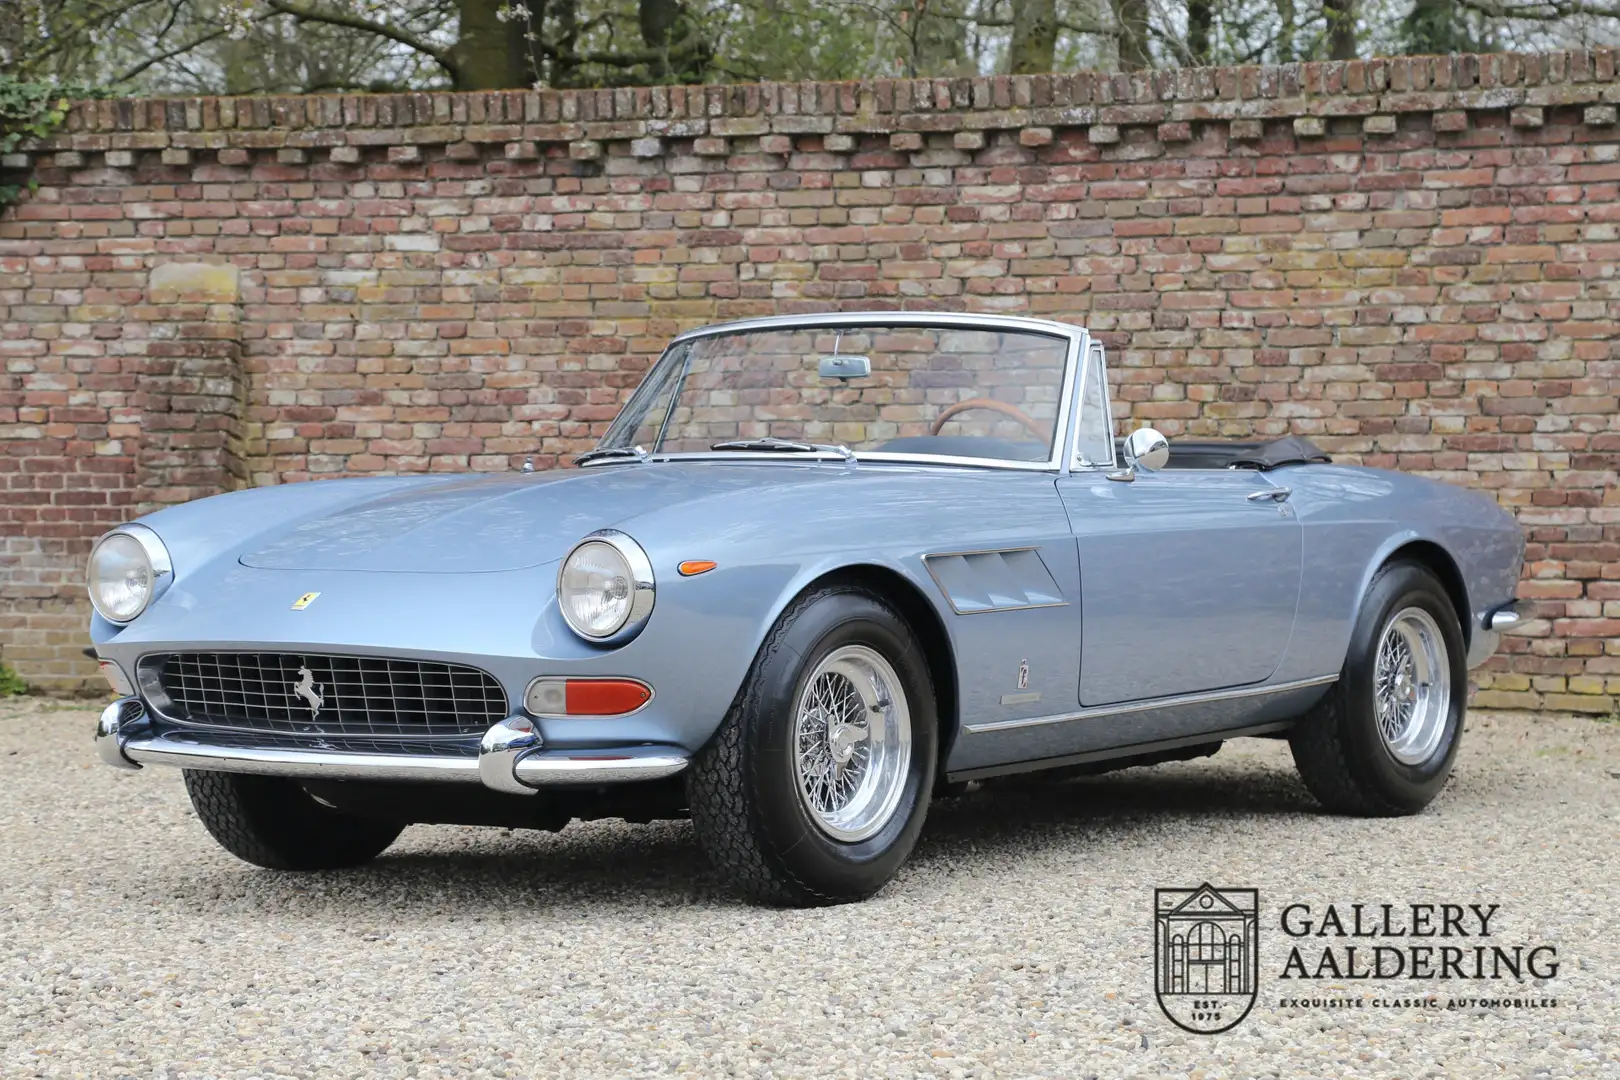 Ferrari 275 GTS 34000 Miles! Equipped with factory hard top, F Bleu - 1